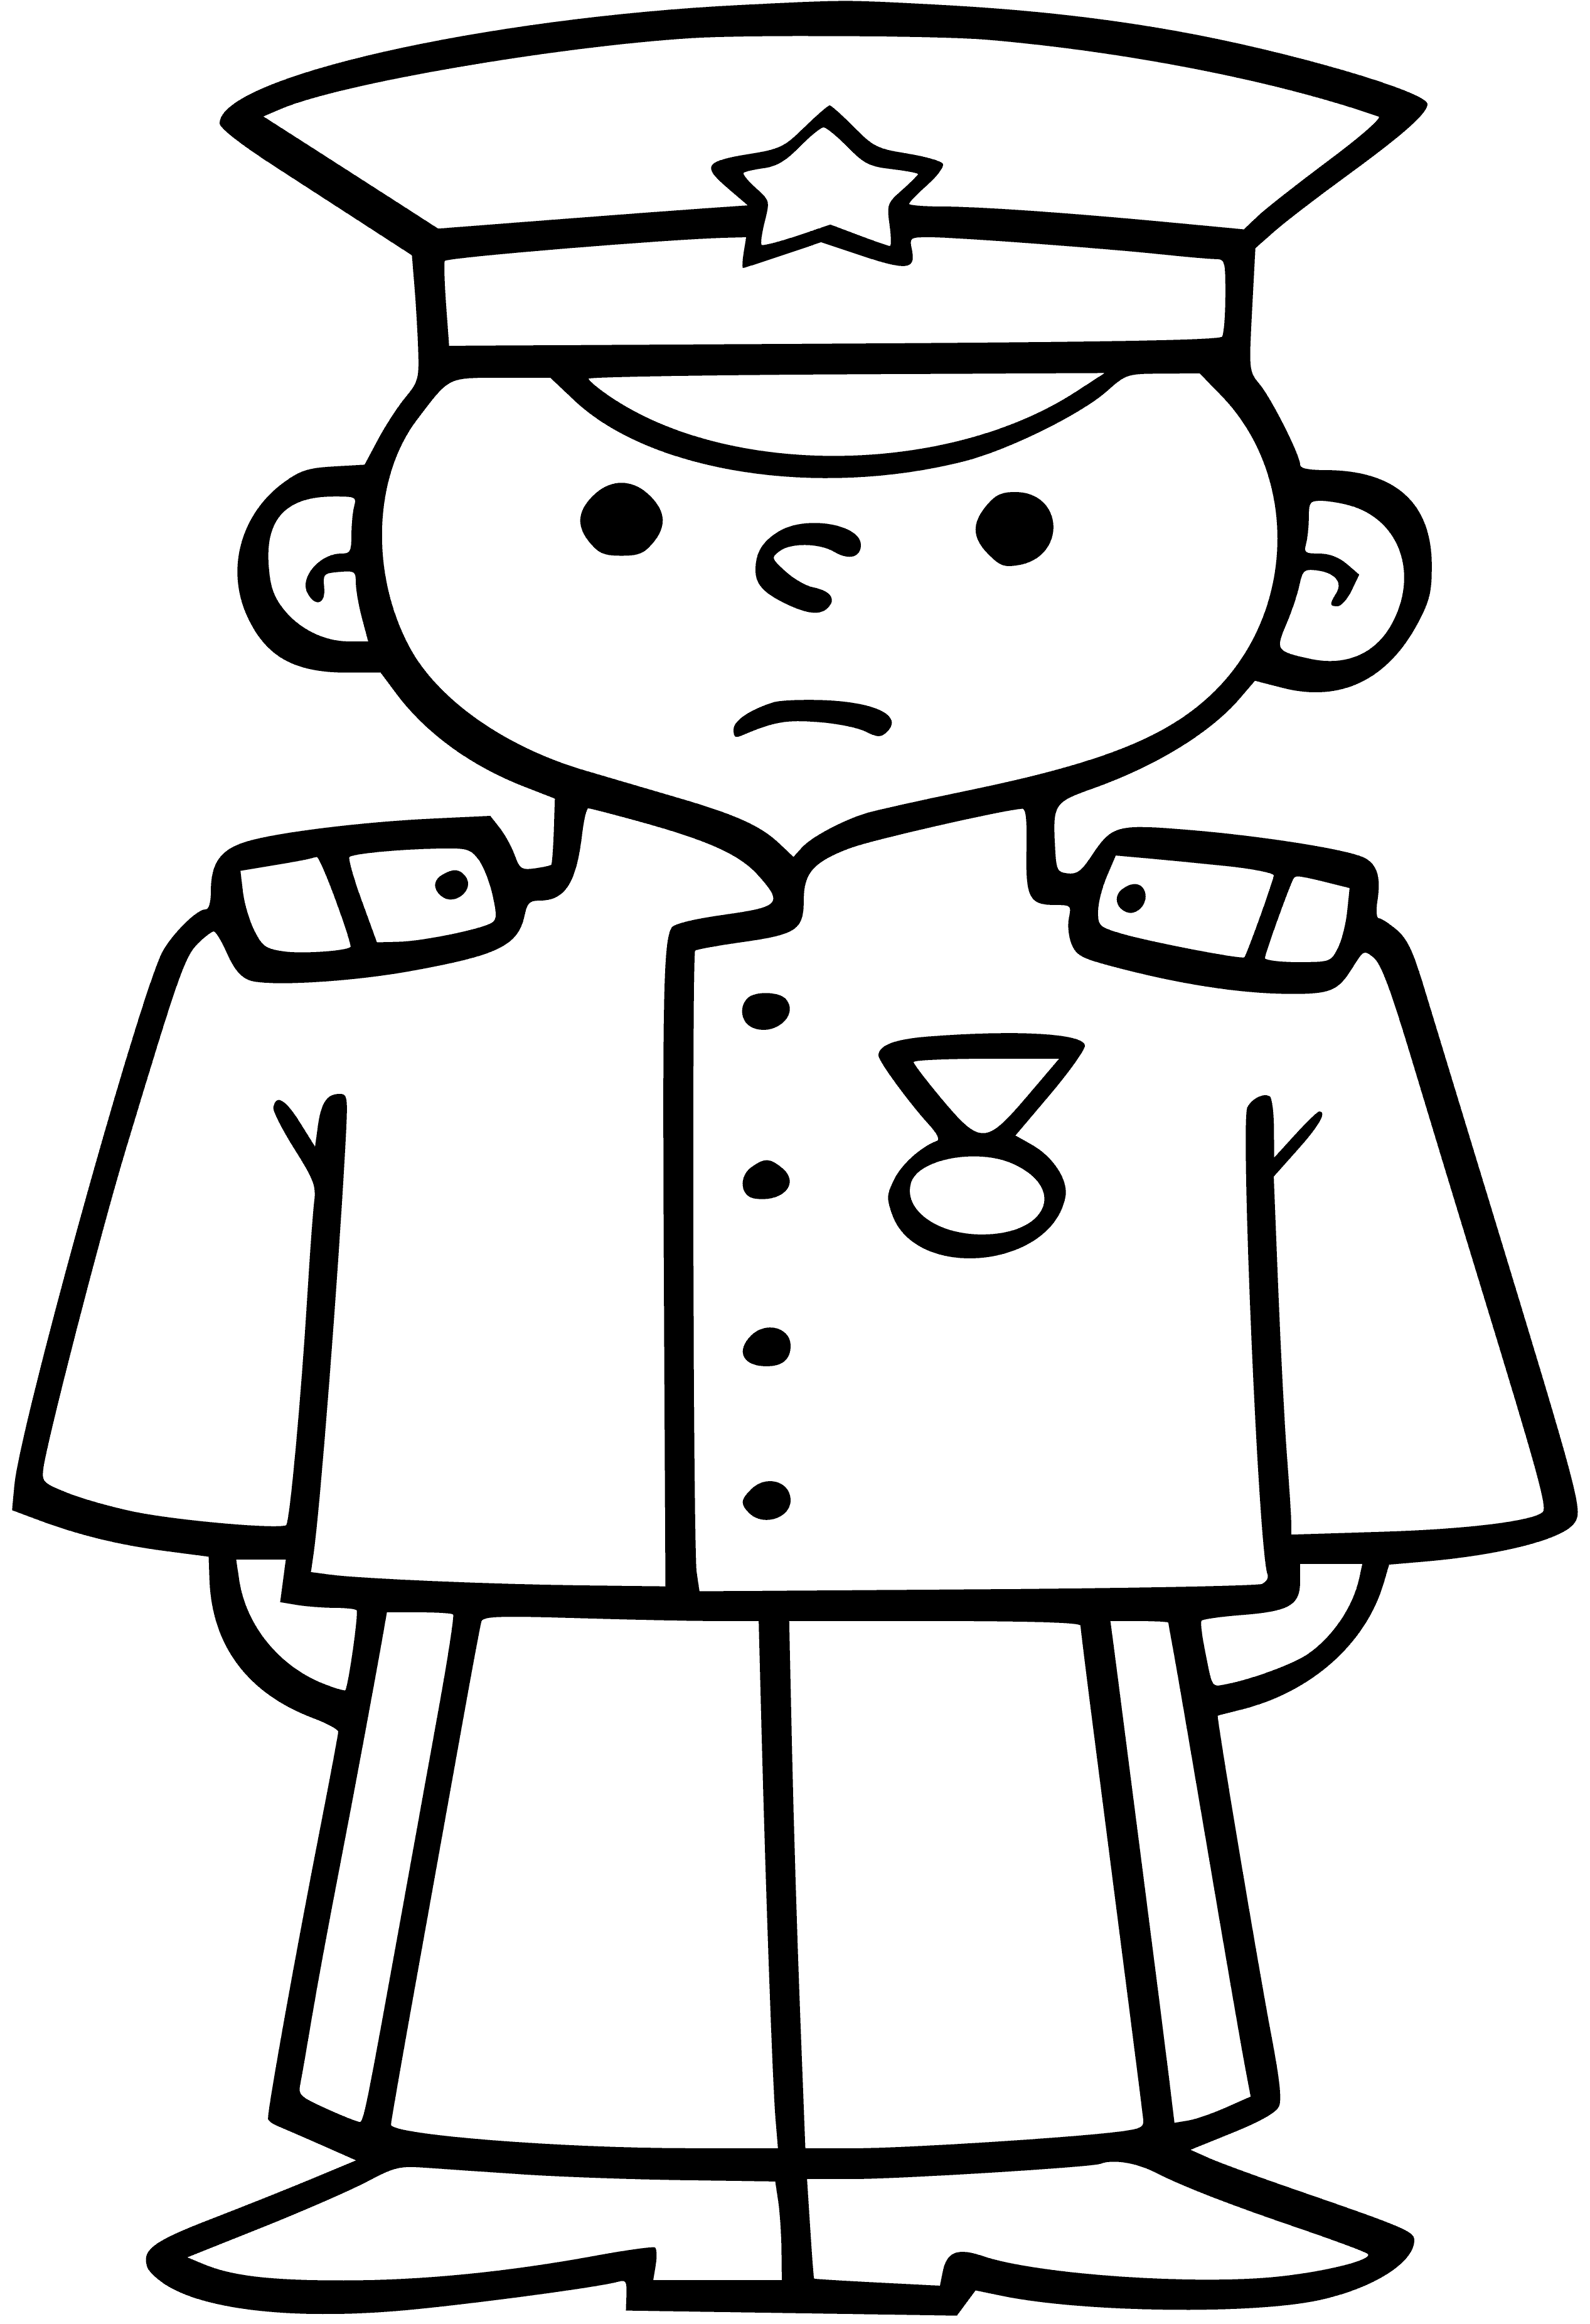 coloring page: Officers work in governmental/military capacity to enforce laws, maintain order and protect citizens. Armed & wear uniforms.